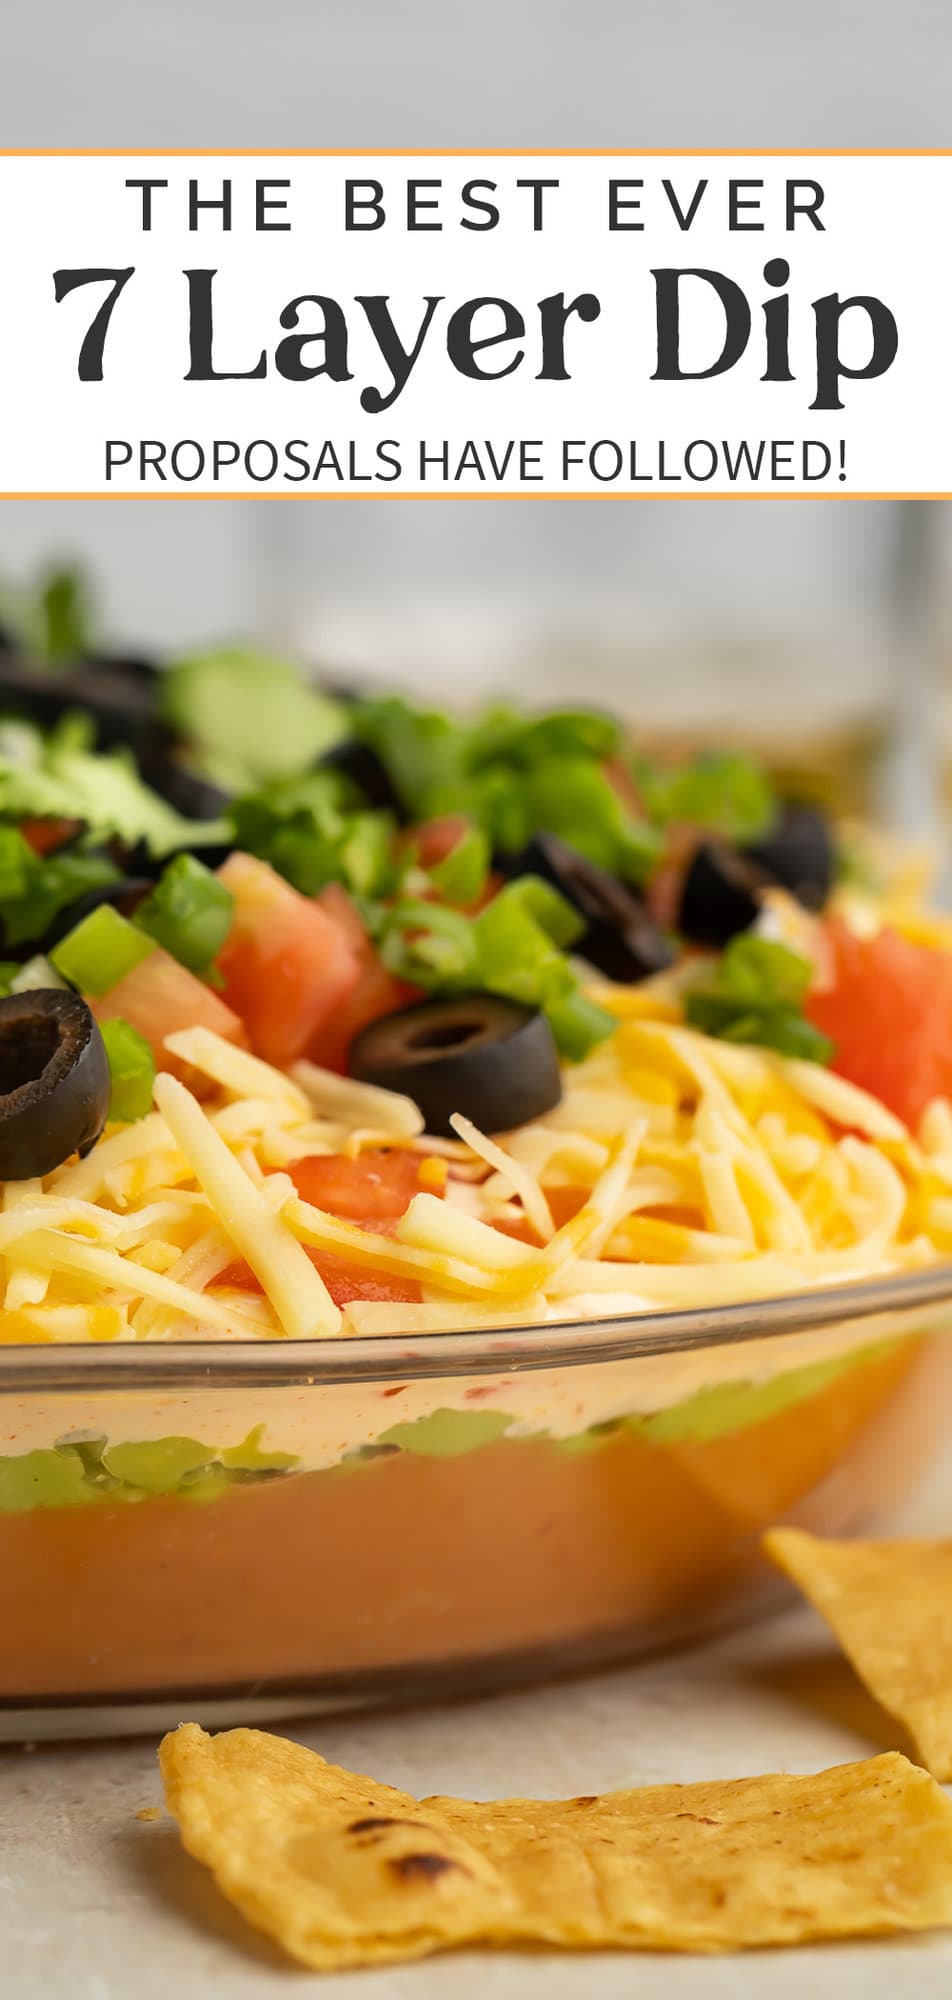 Pin graphic for 7 layer dip.